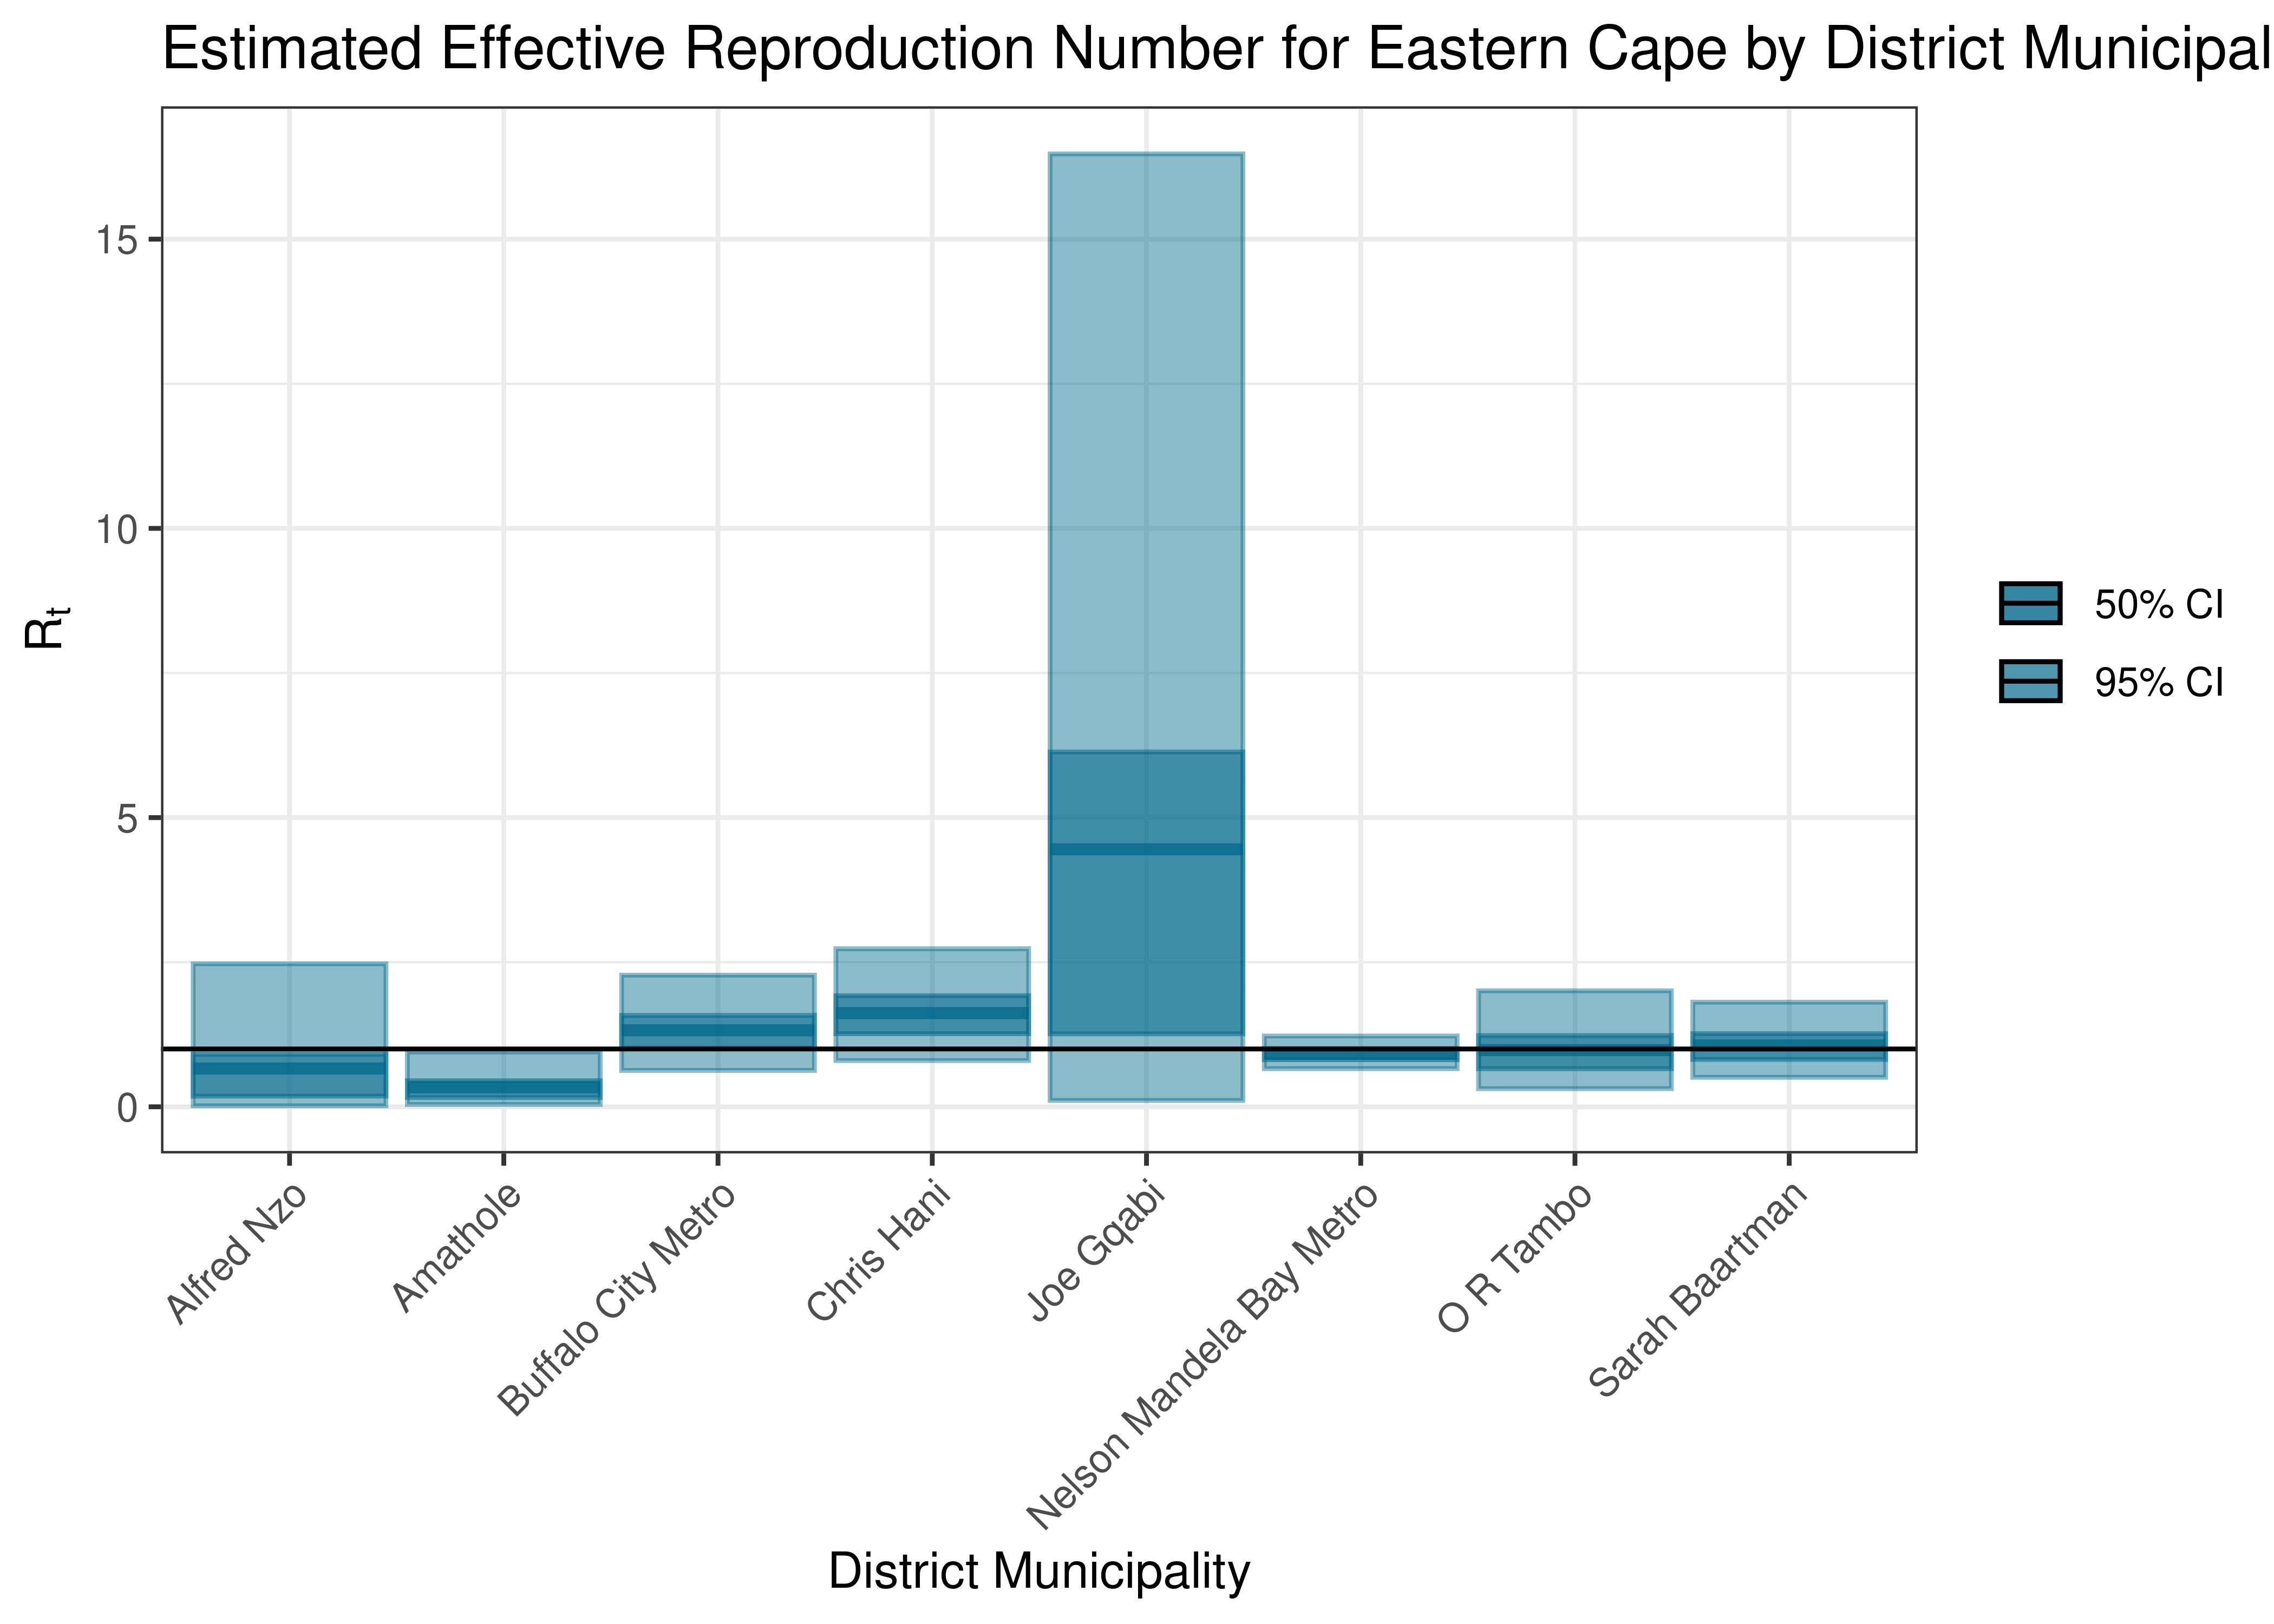 Estimated Effective Reproduction Number for Eastern Cape by District Municipality